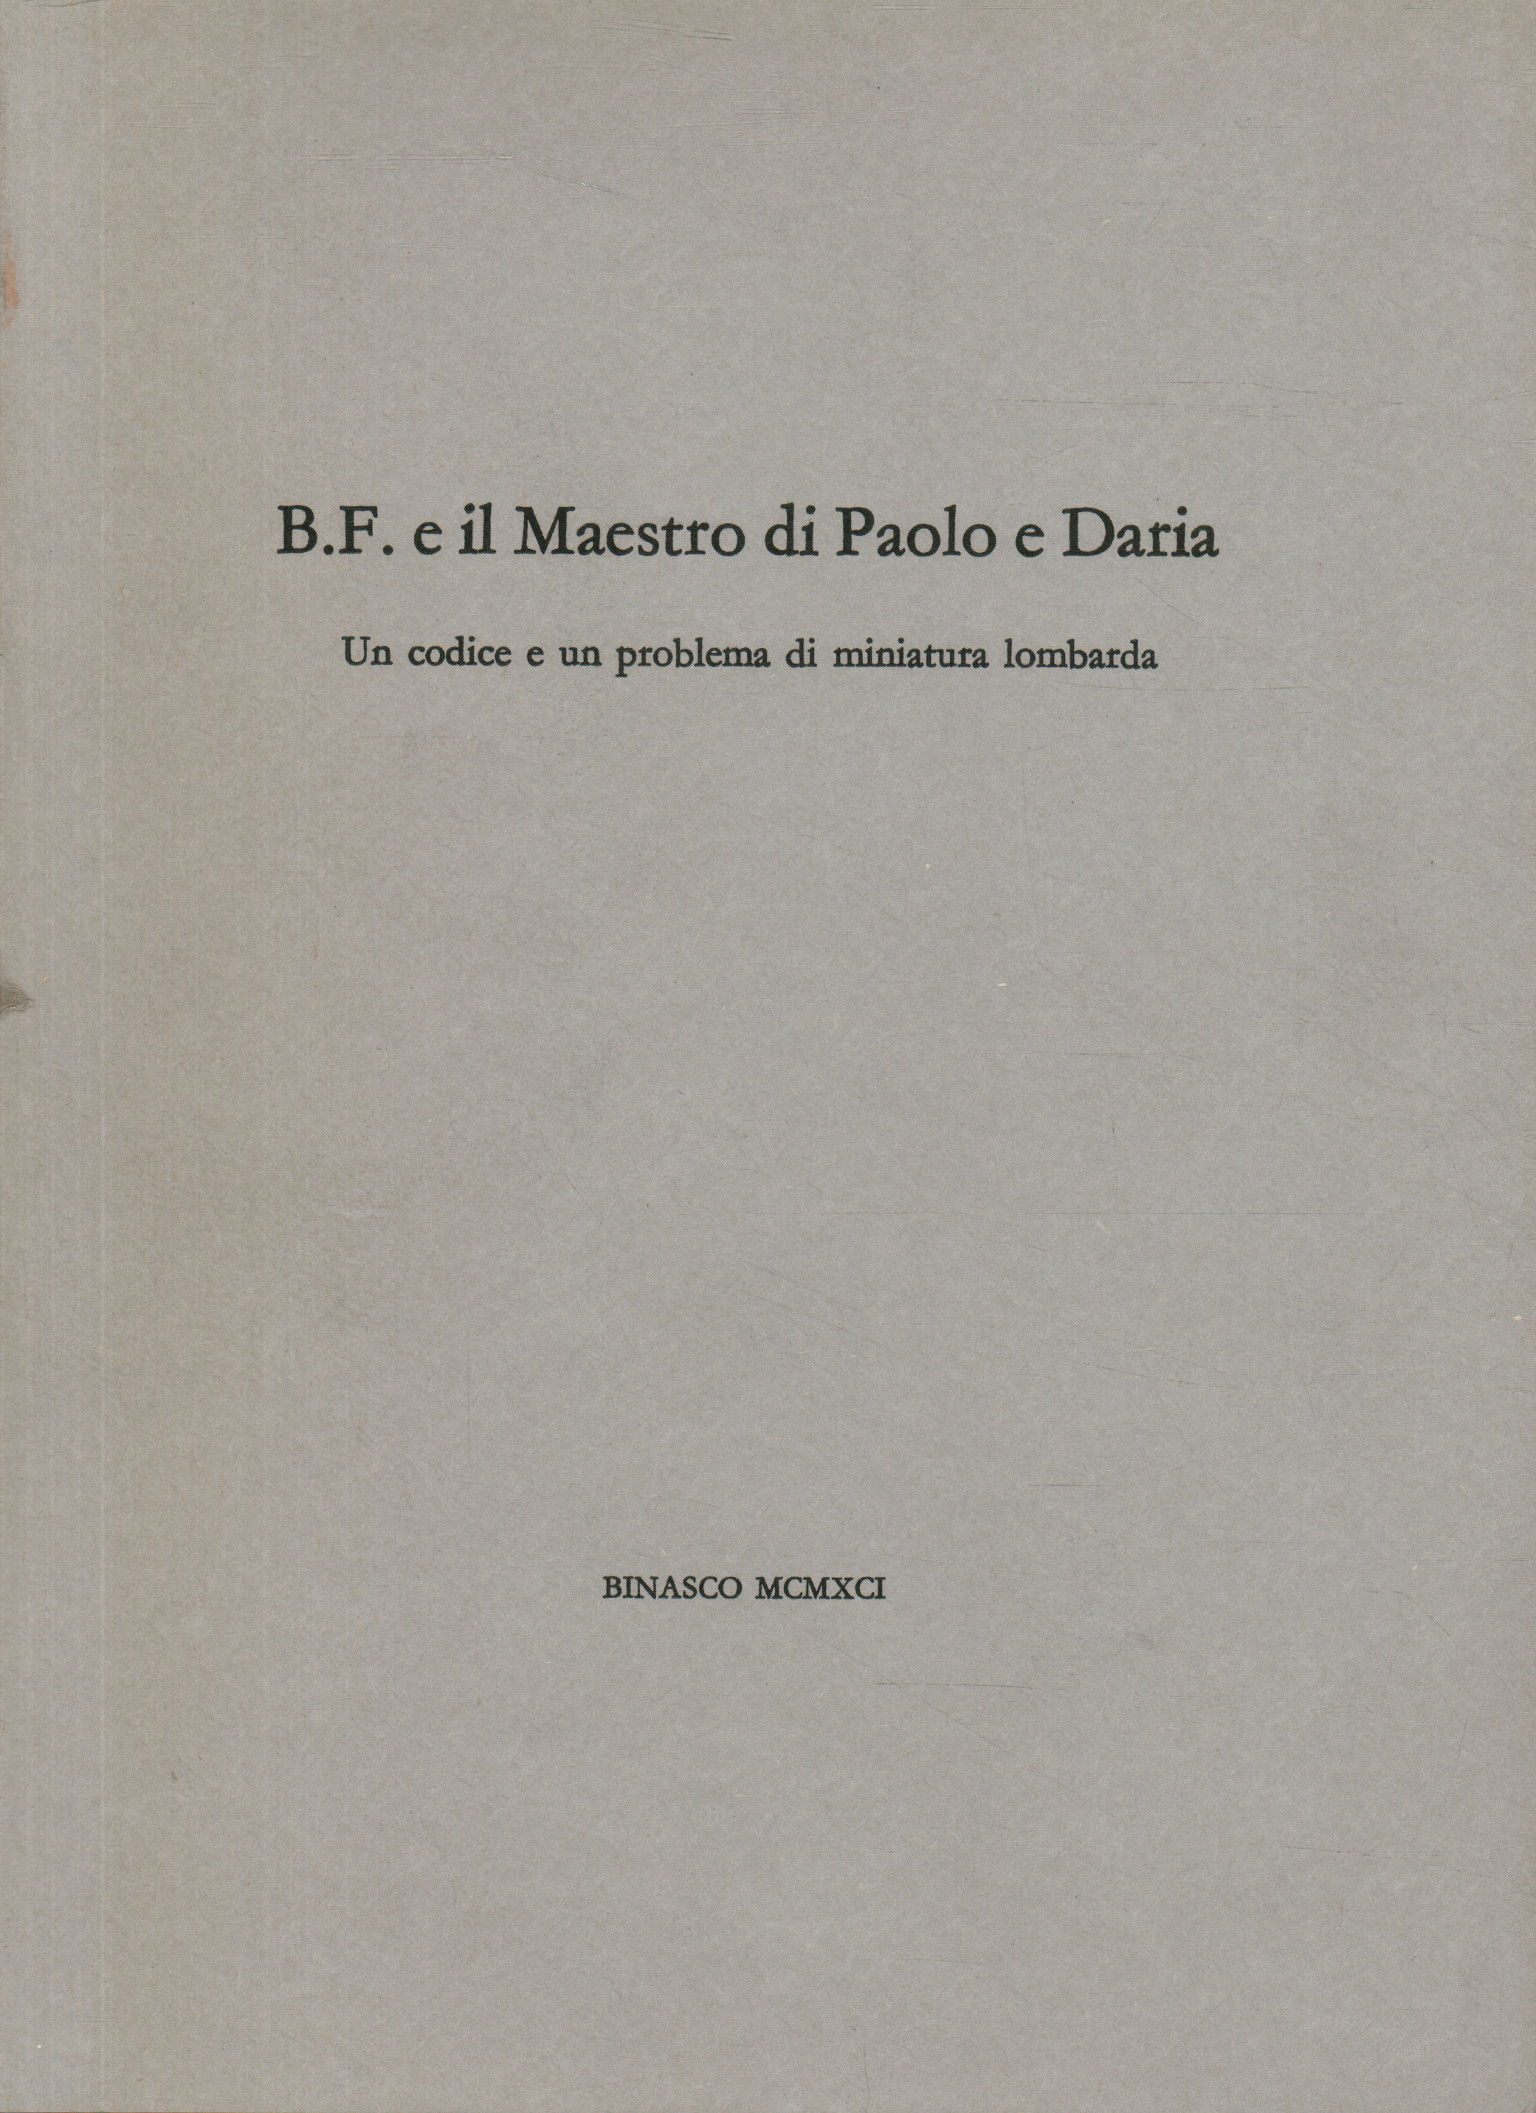 B.F. and the Master of Paolo and Daria